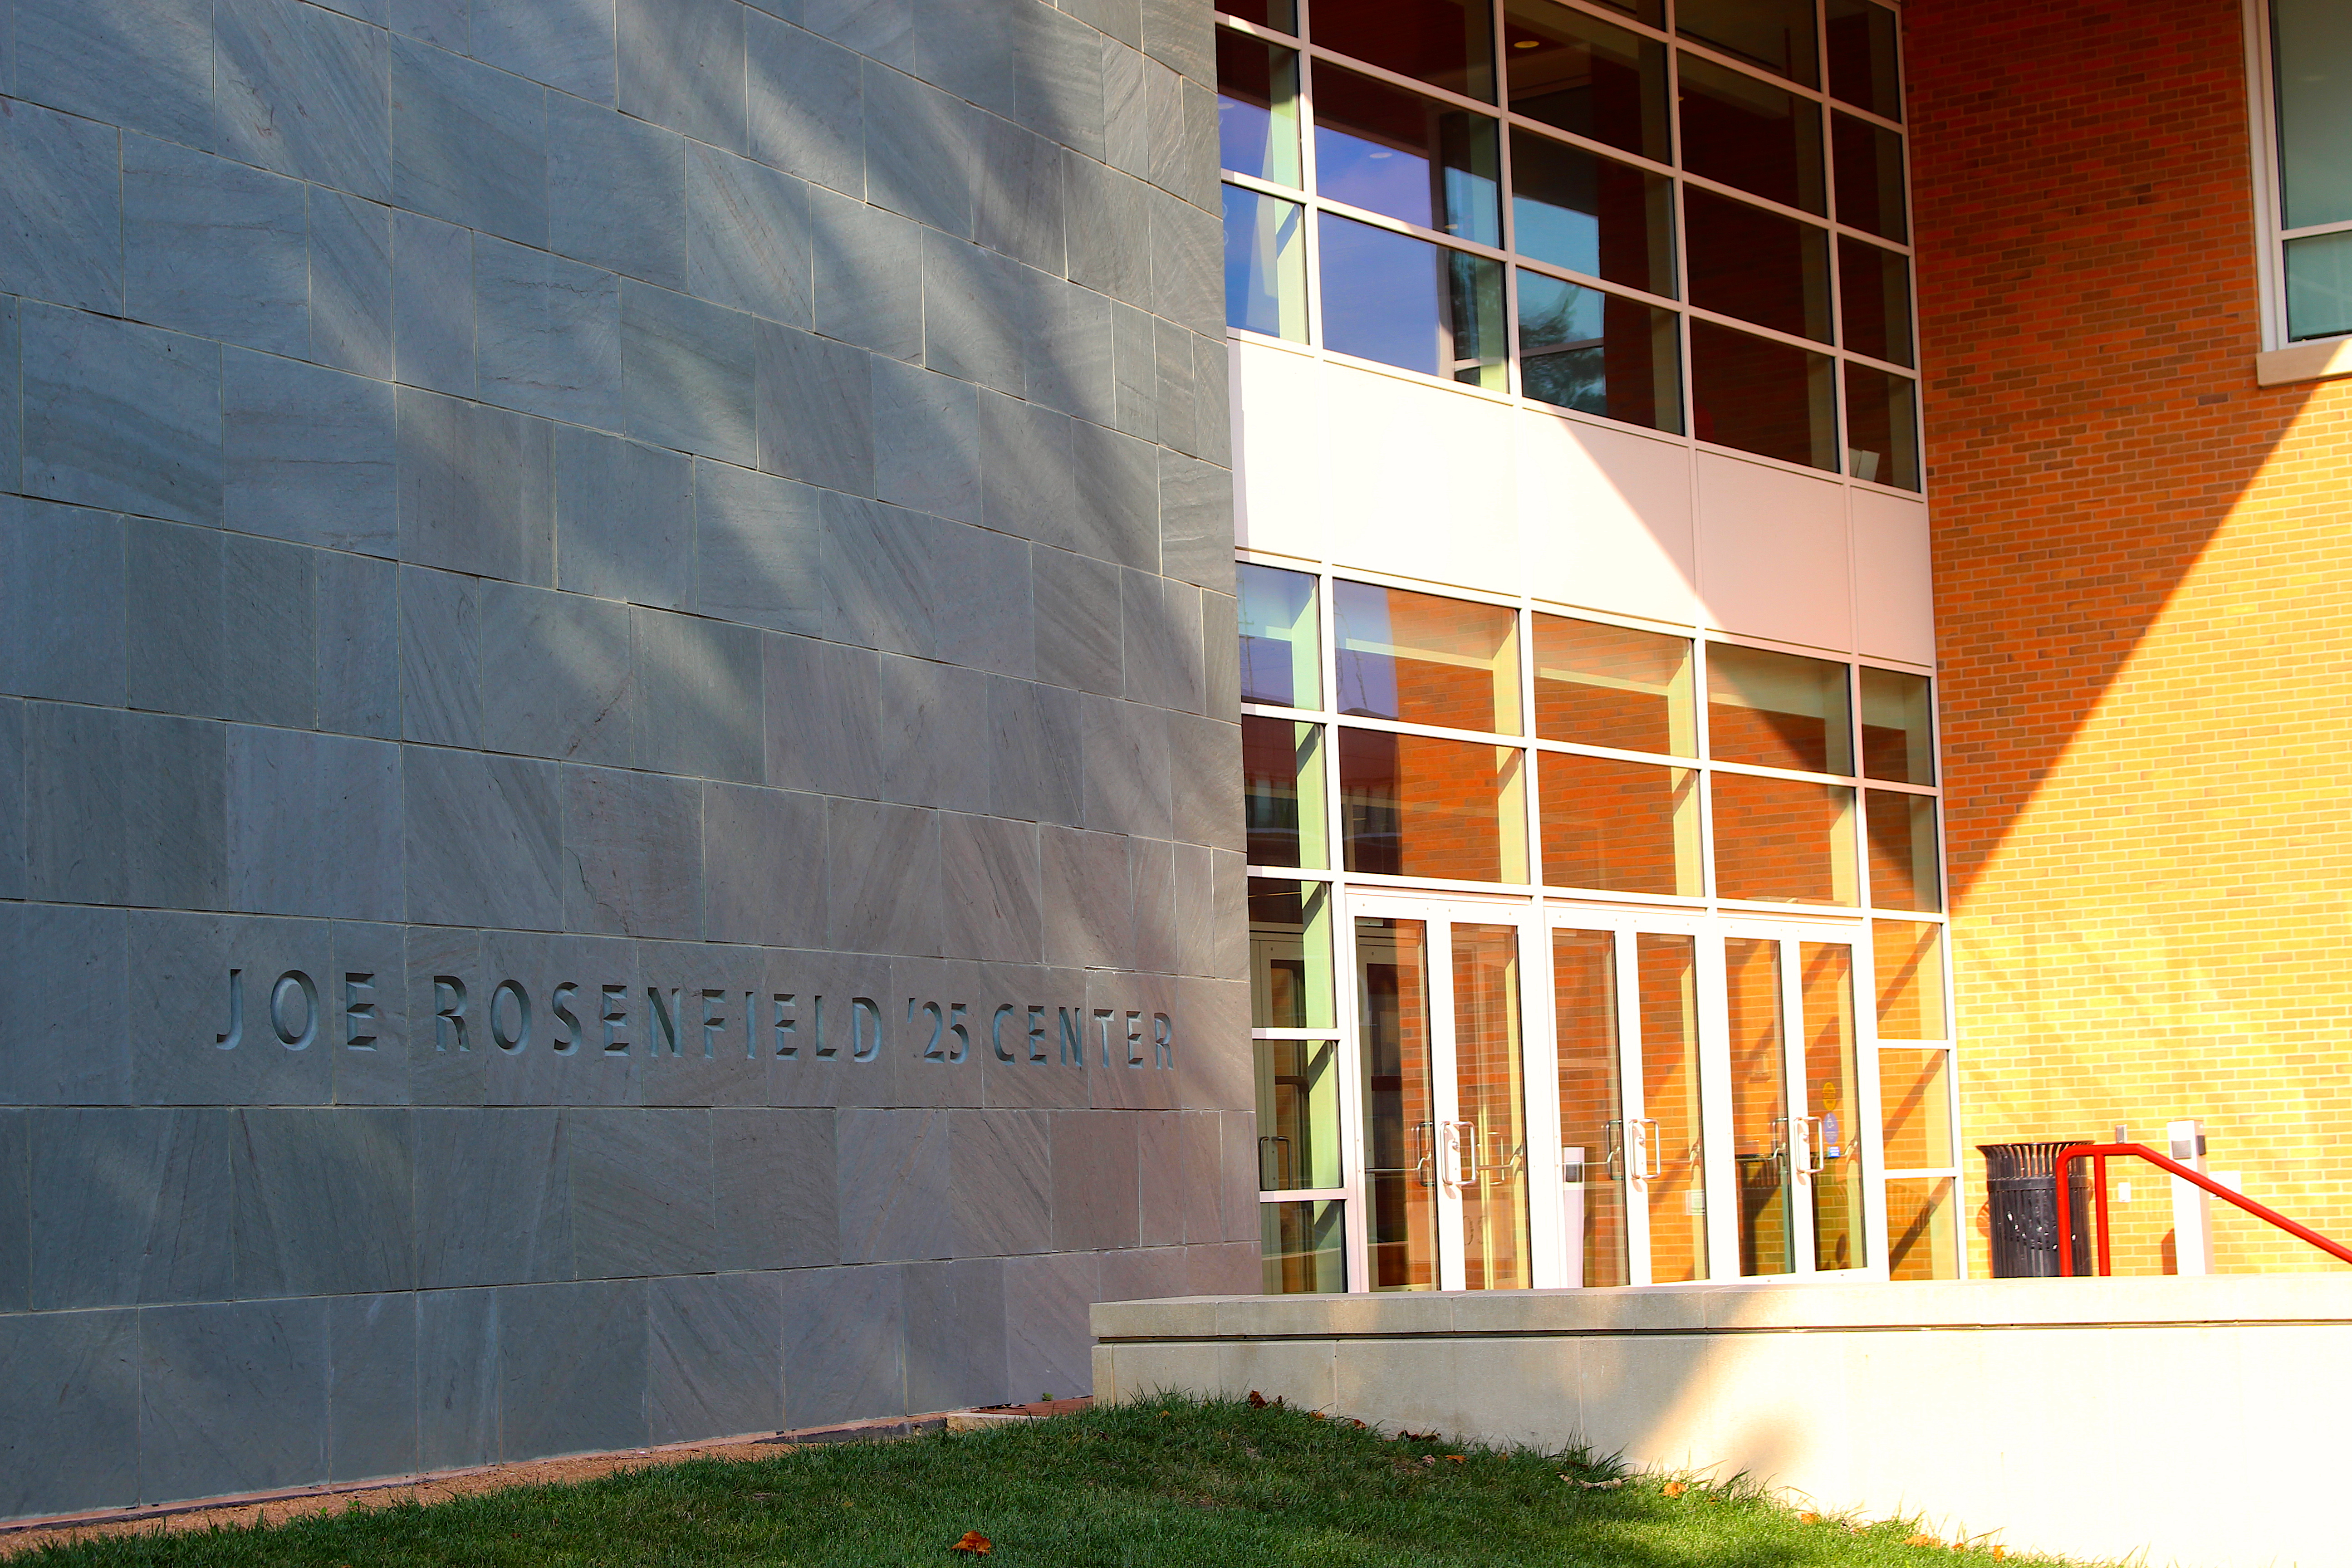 Joe Rosenfield Center, where Dining Services is located